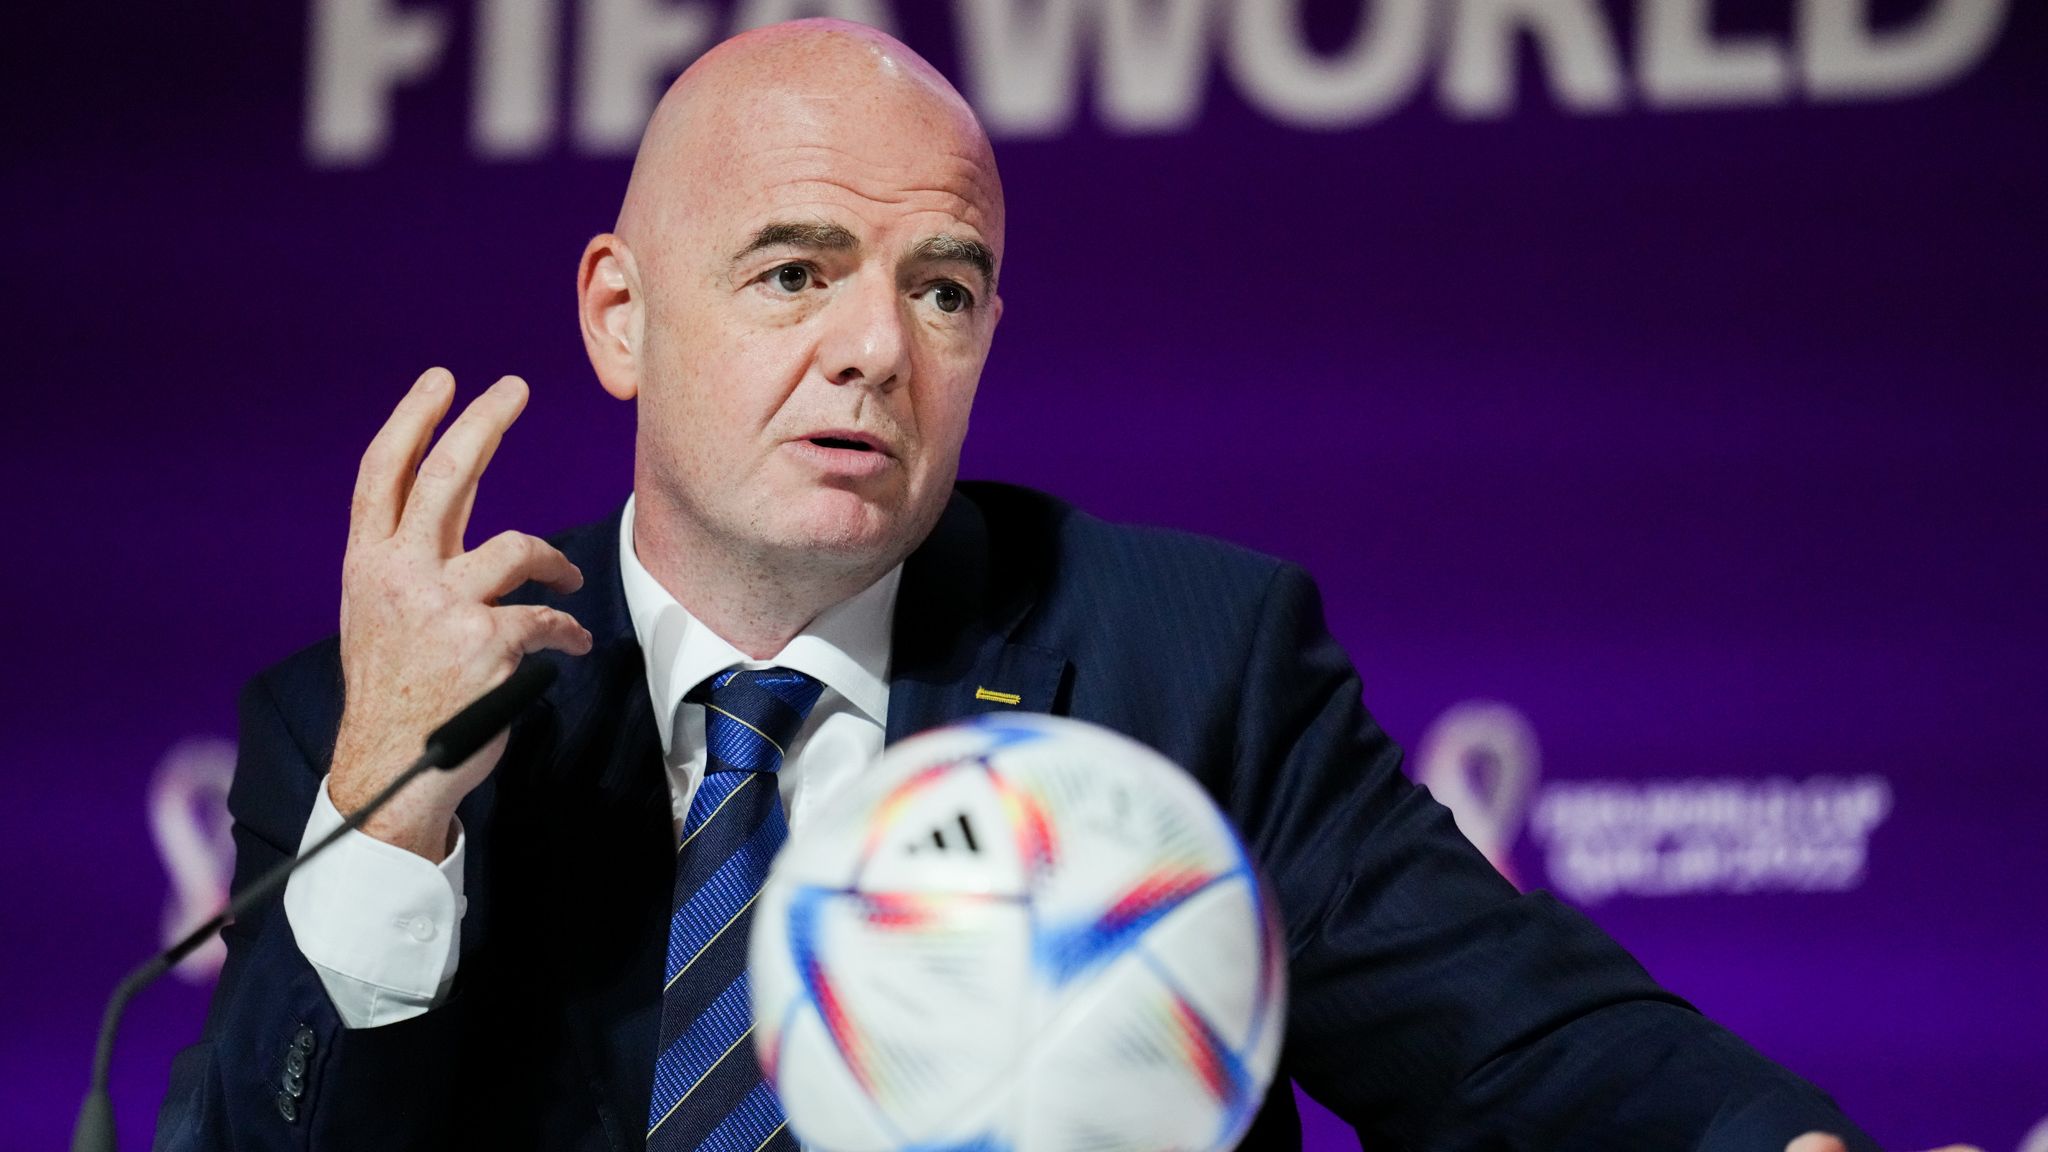 Gianni Infantino: FIFA president hits out at Qatar World Cup criticism in  extraordinary speech ahead of tournament | Football News | Sky Sports